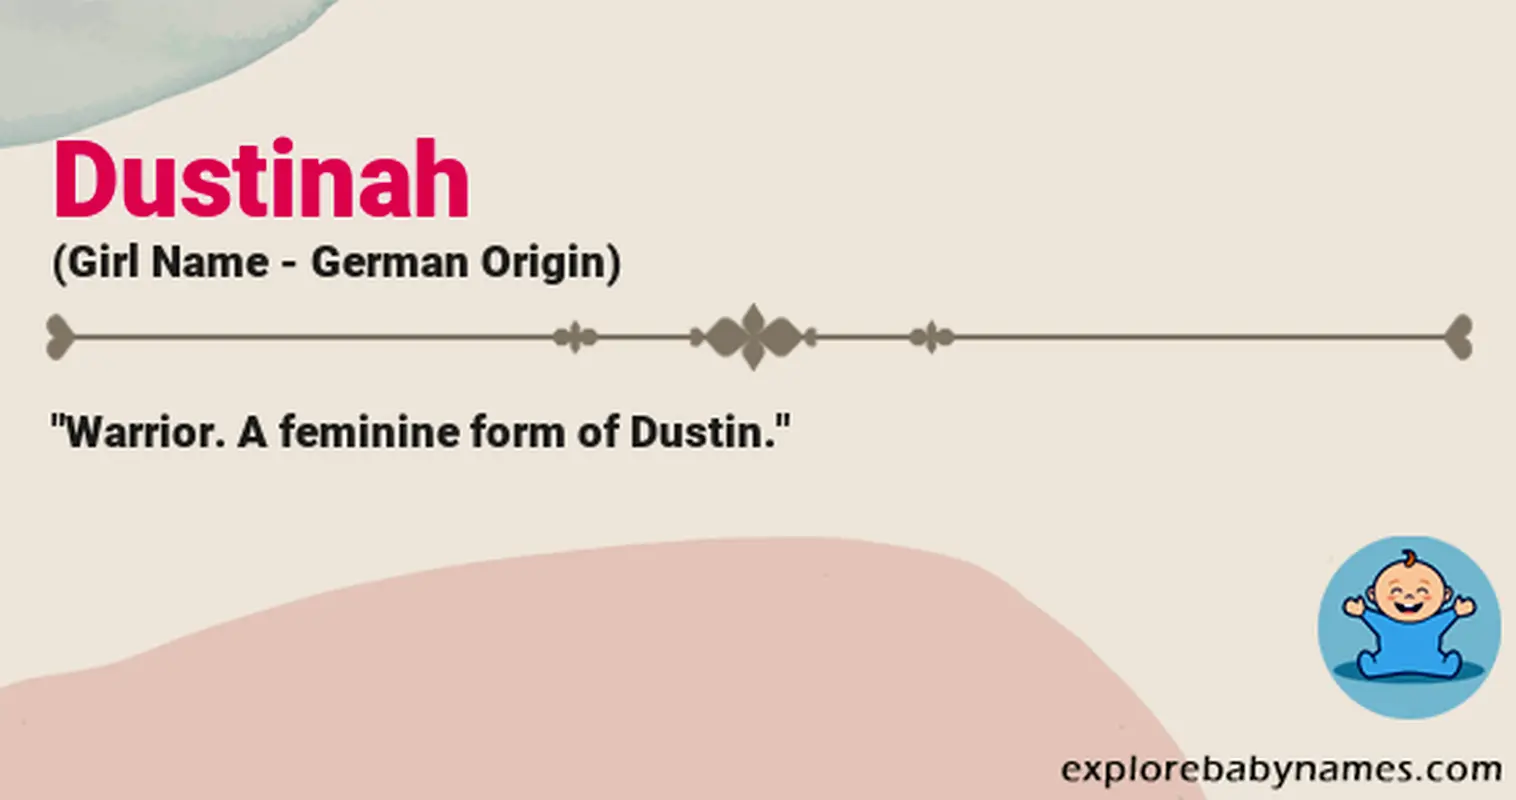 Meaning of Dustinah